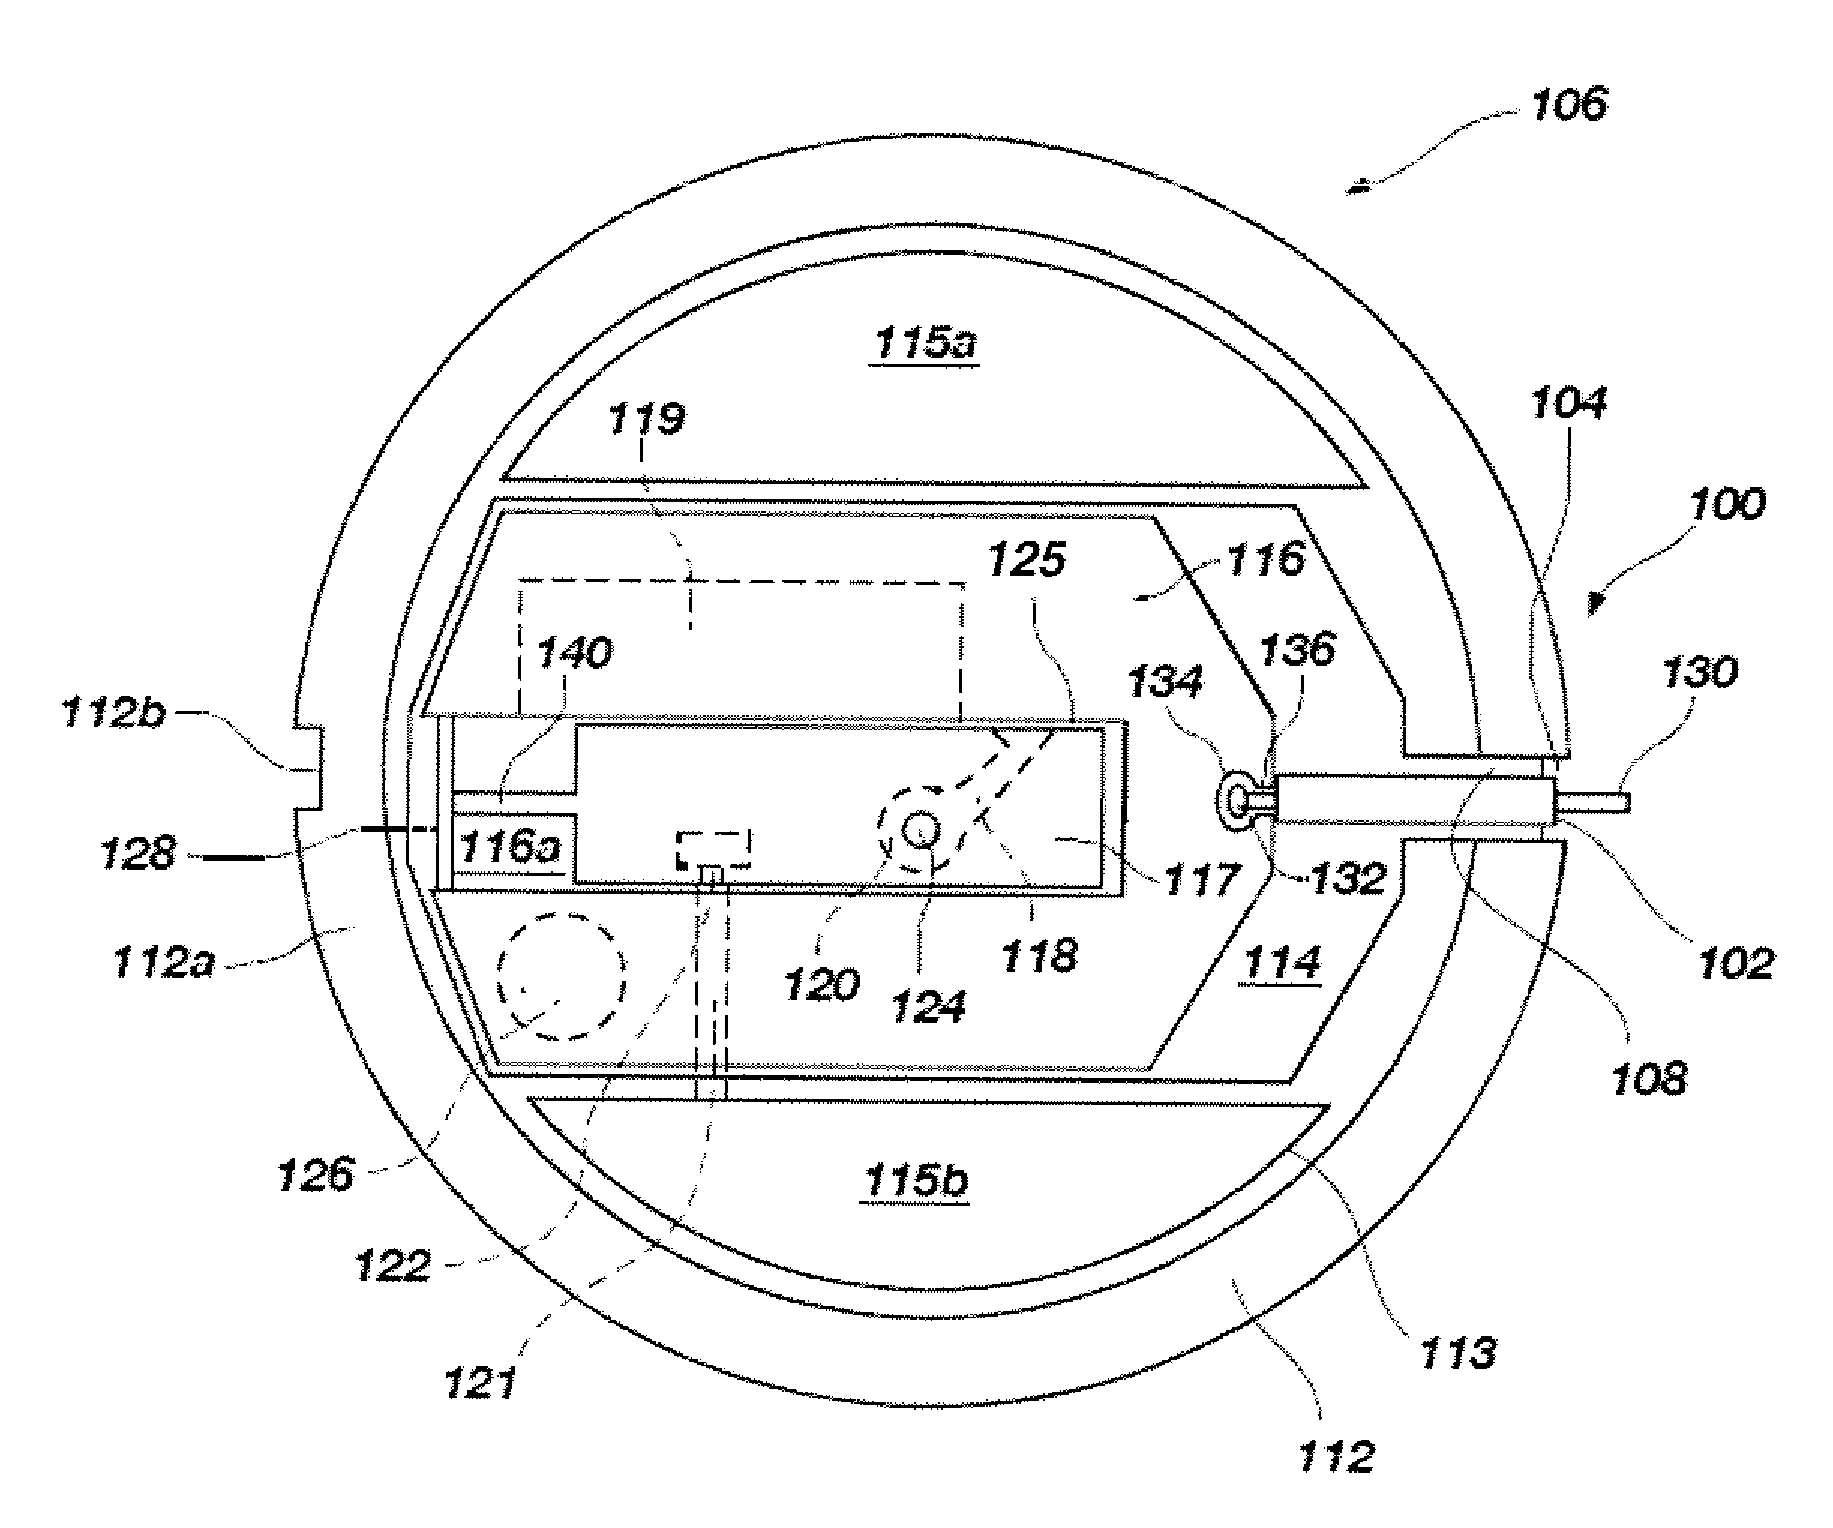 Igniter safe and arm, igniter assembly and flare so equipped and method of providing a safety for an igniter assembly